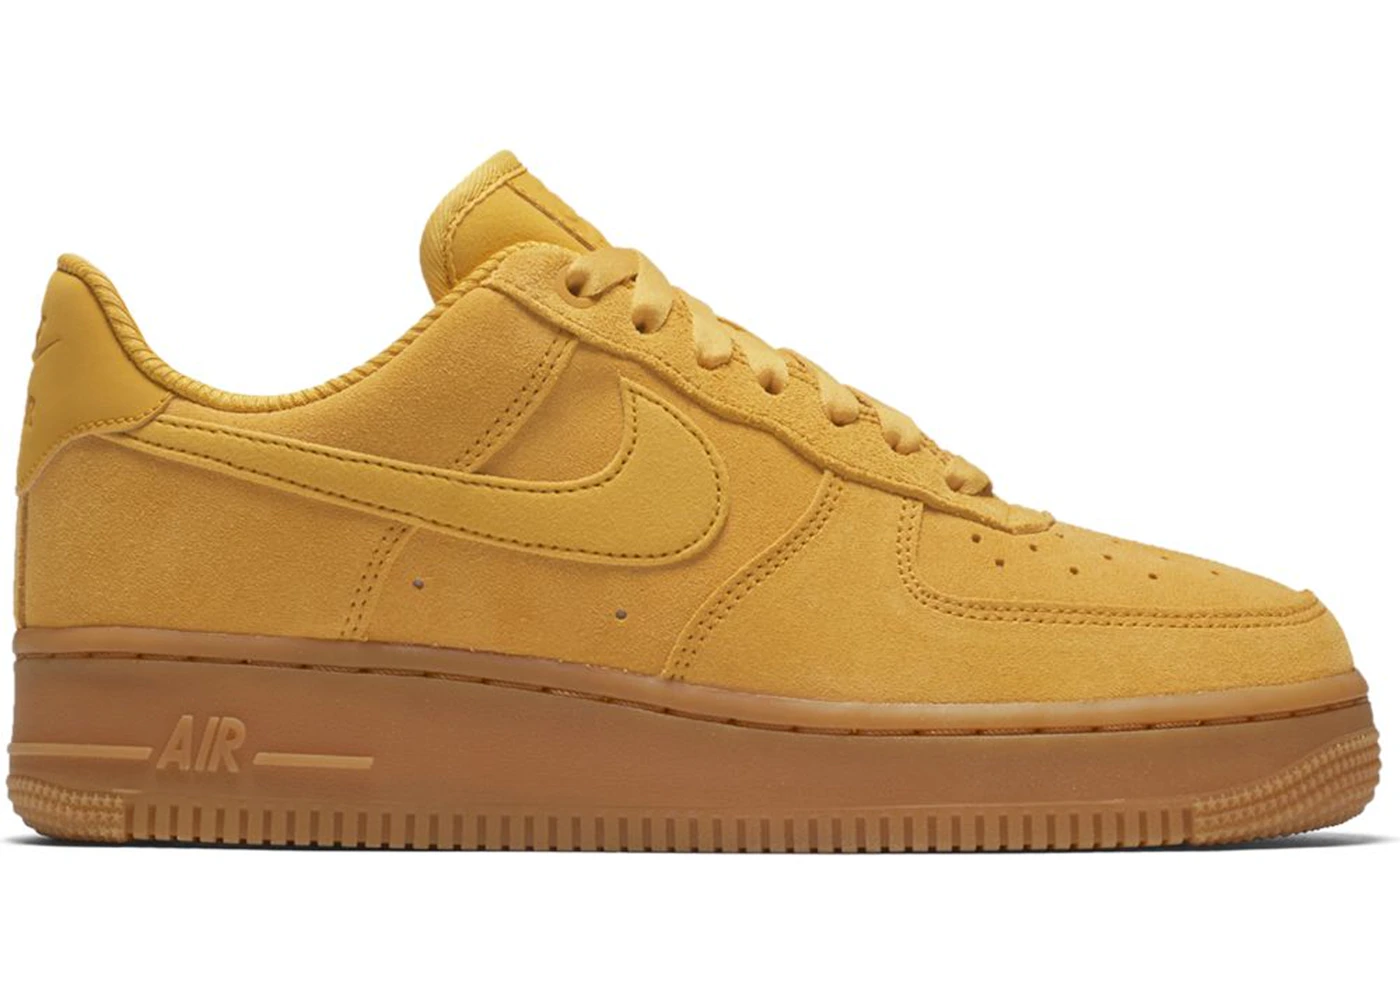 Nike Air Force Low Mineral Yellow Gum (W) - 896184-700 ES